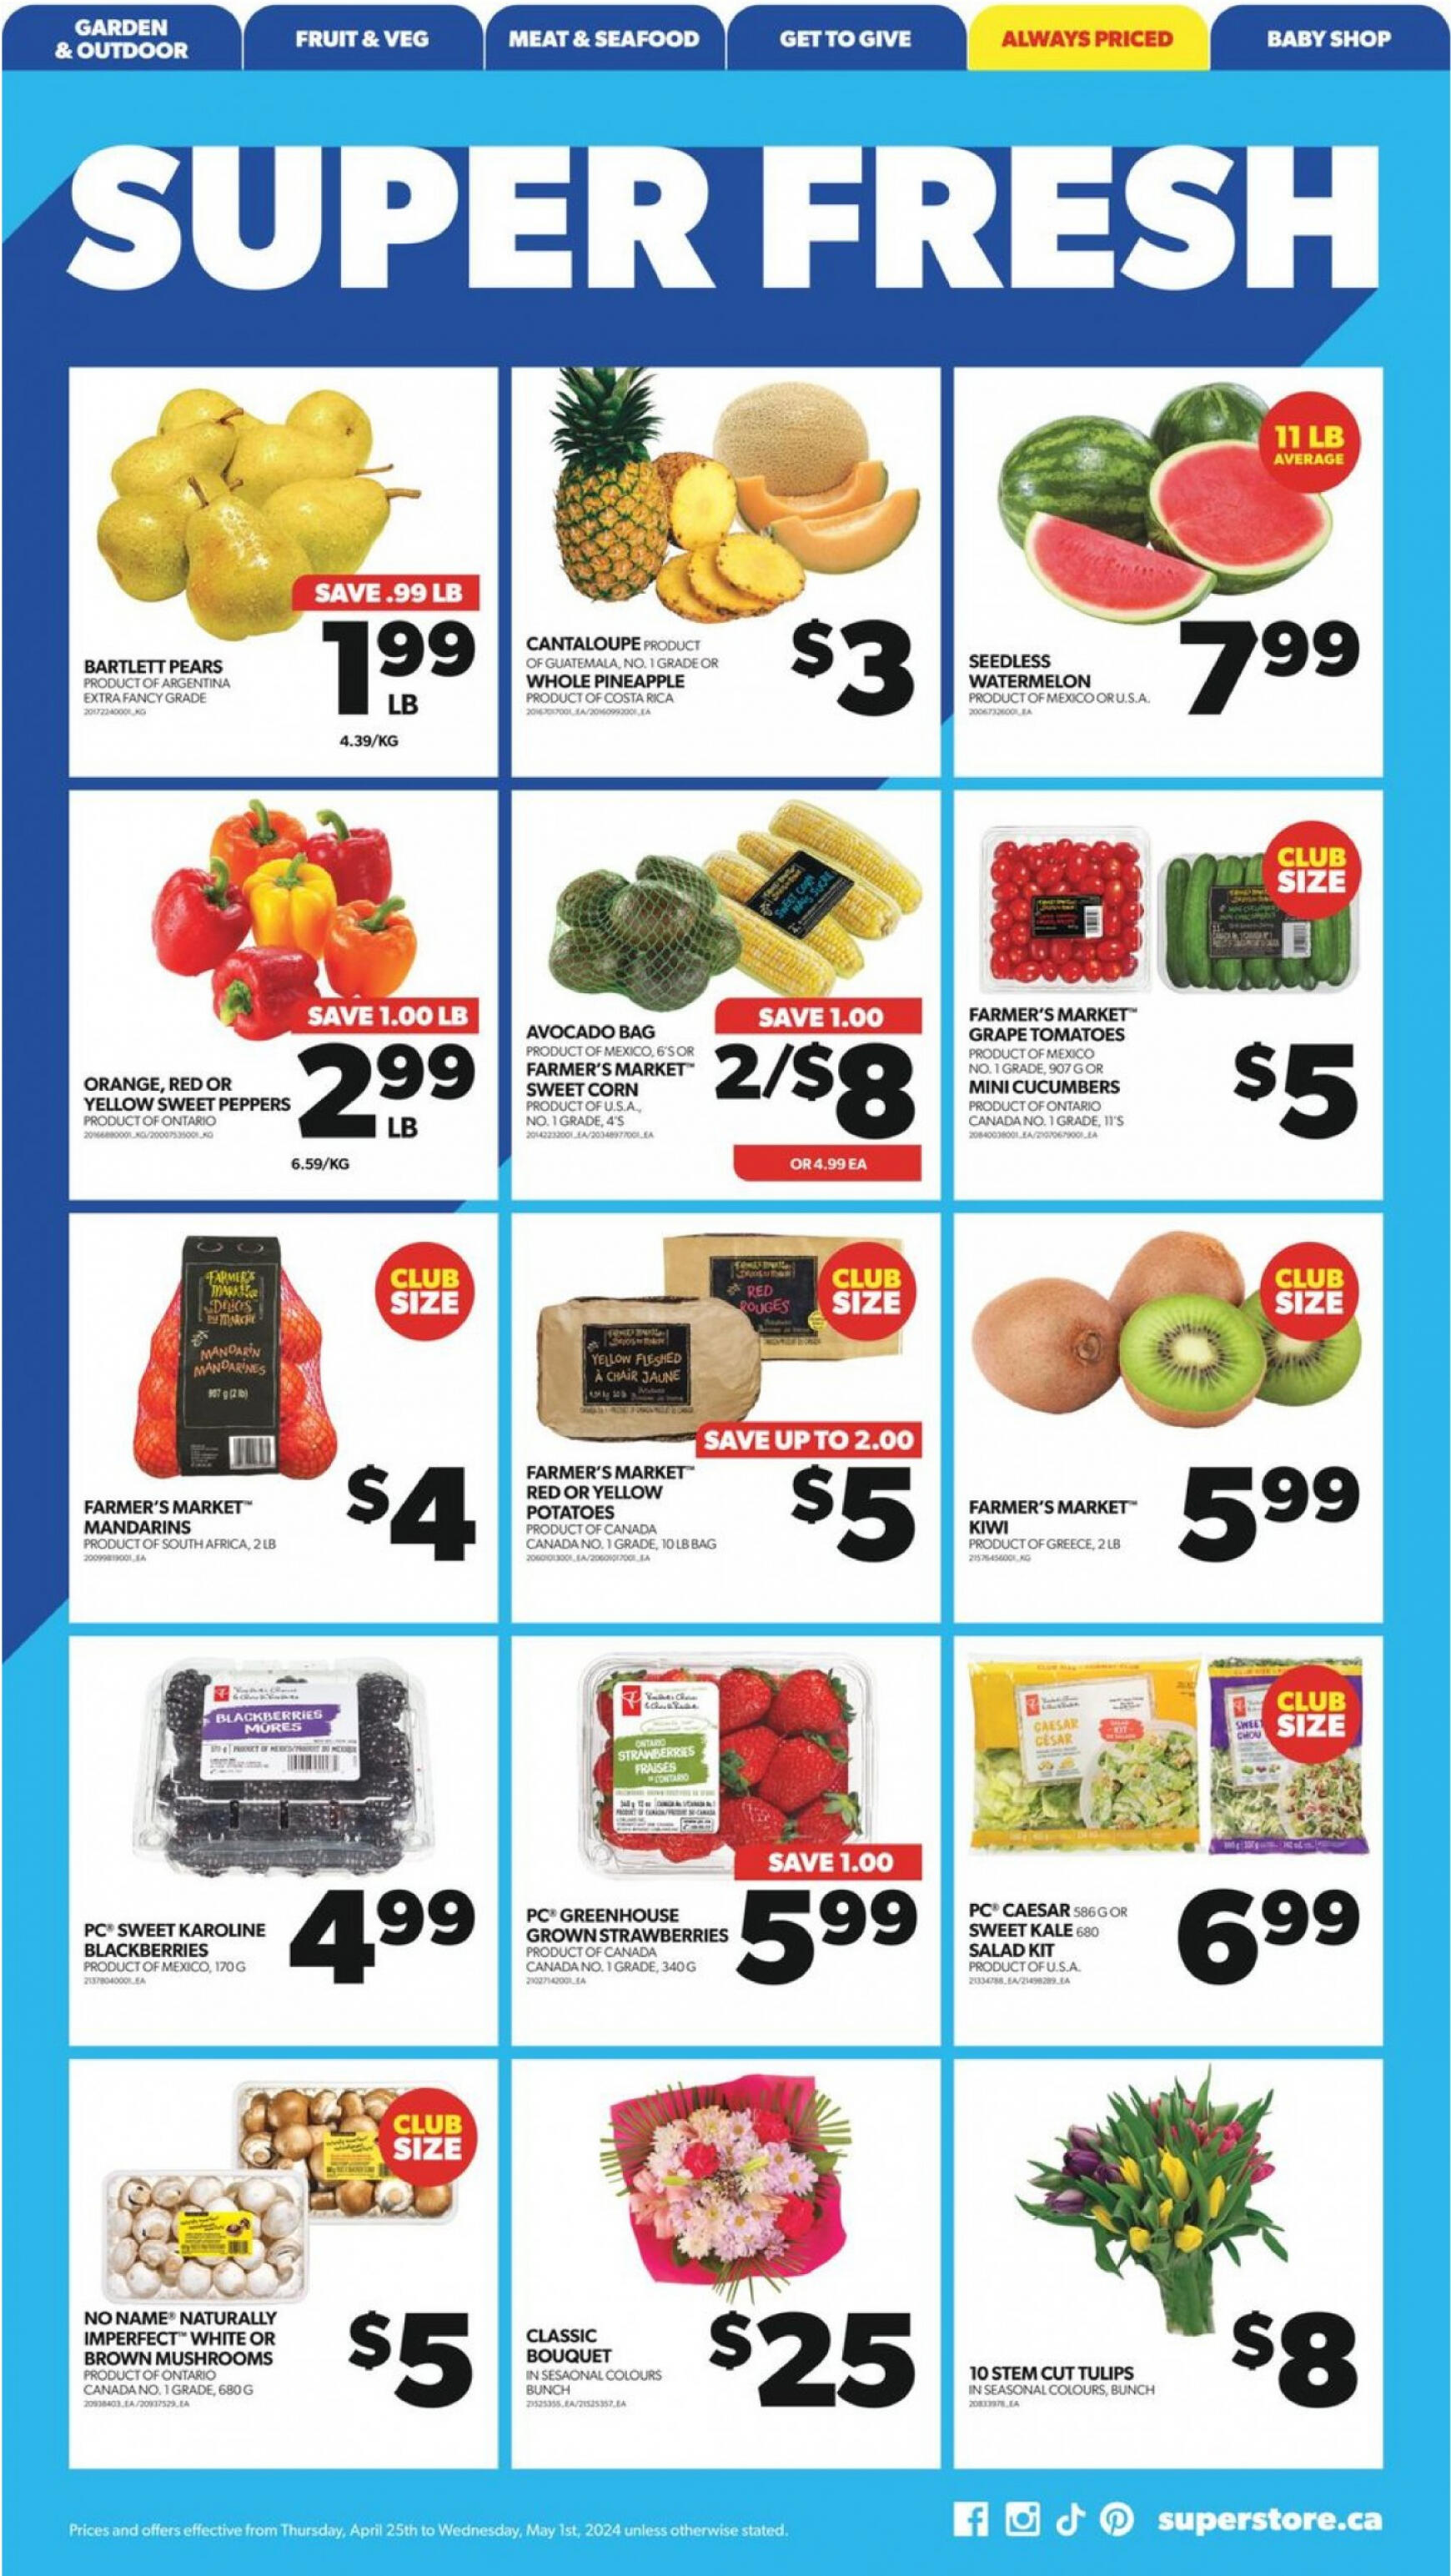 real-canadian-superstore - Real Canadian Superstore flyer current 01.05. - 31.05. - page: 8